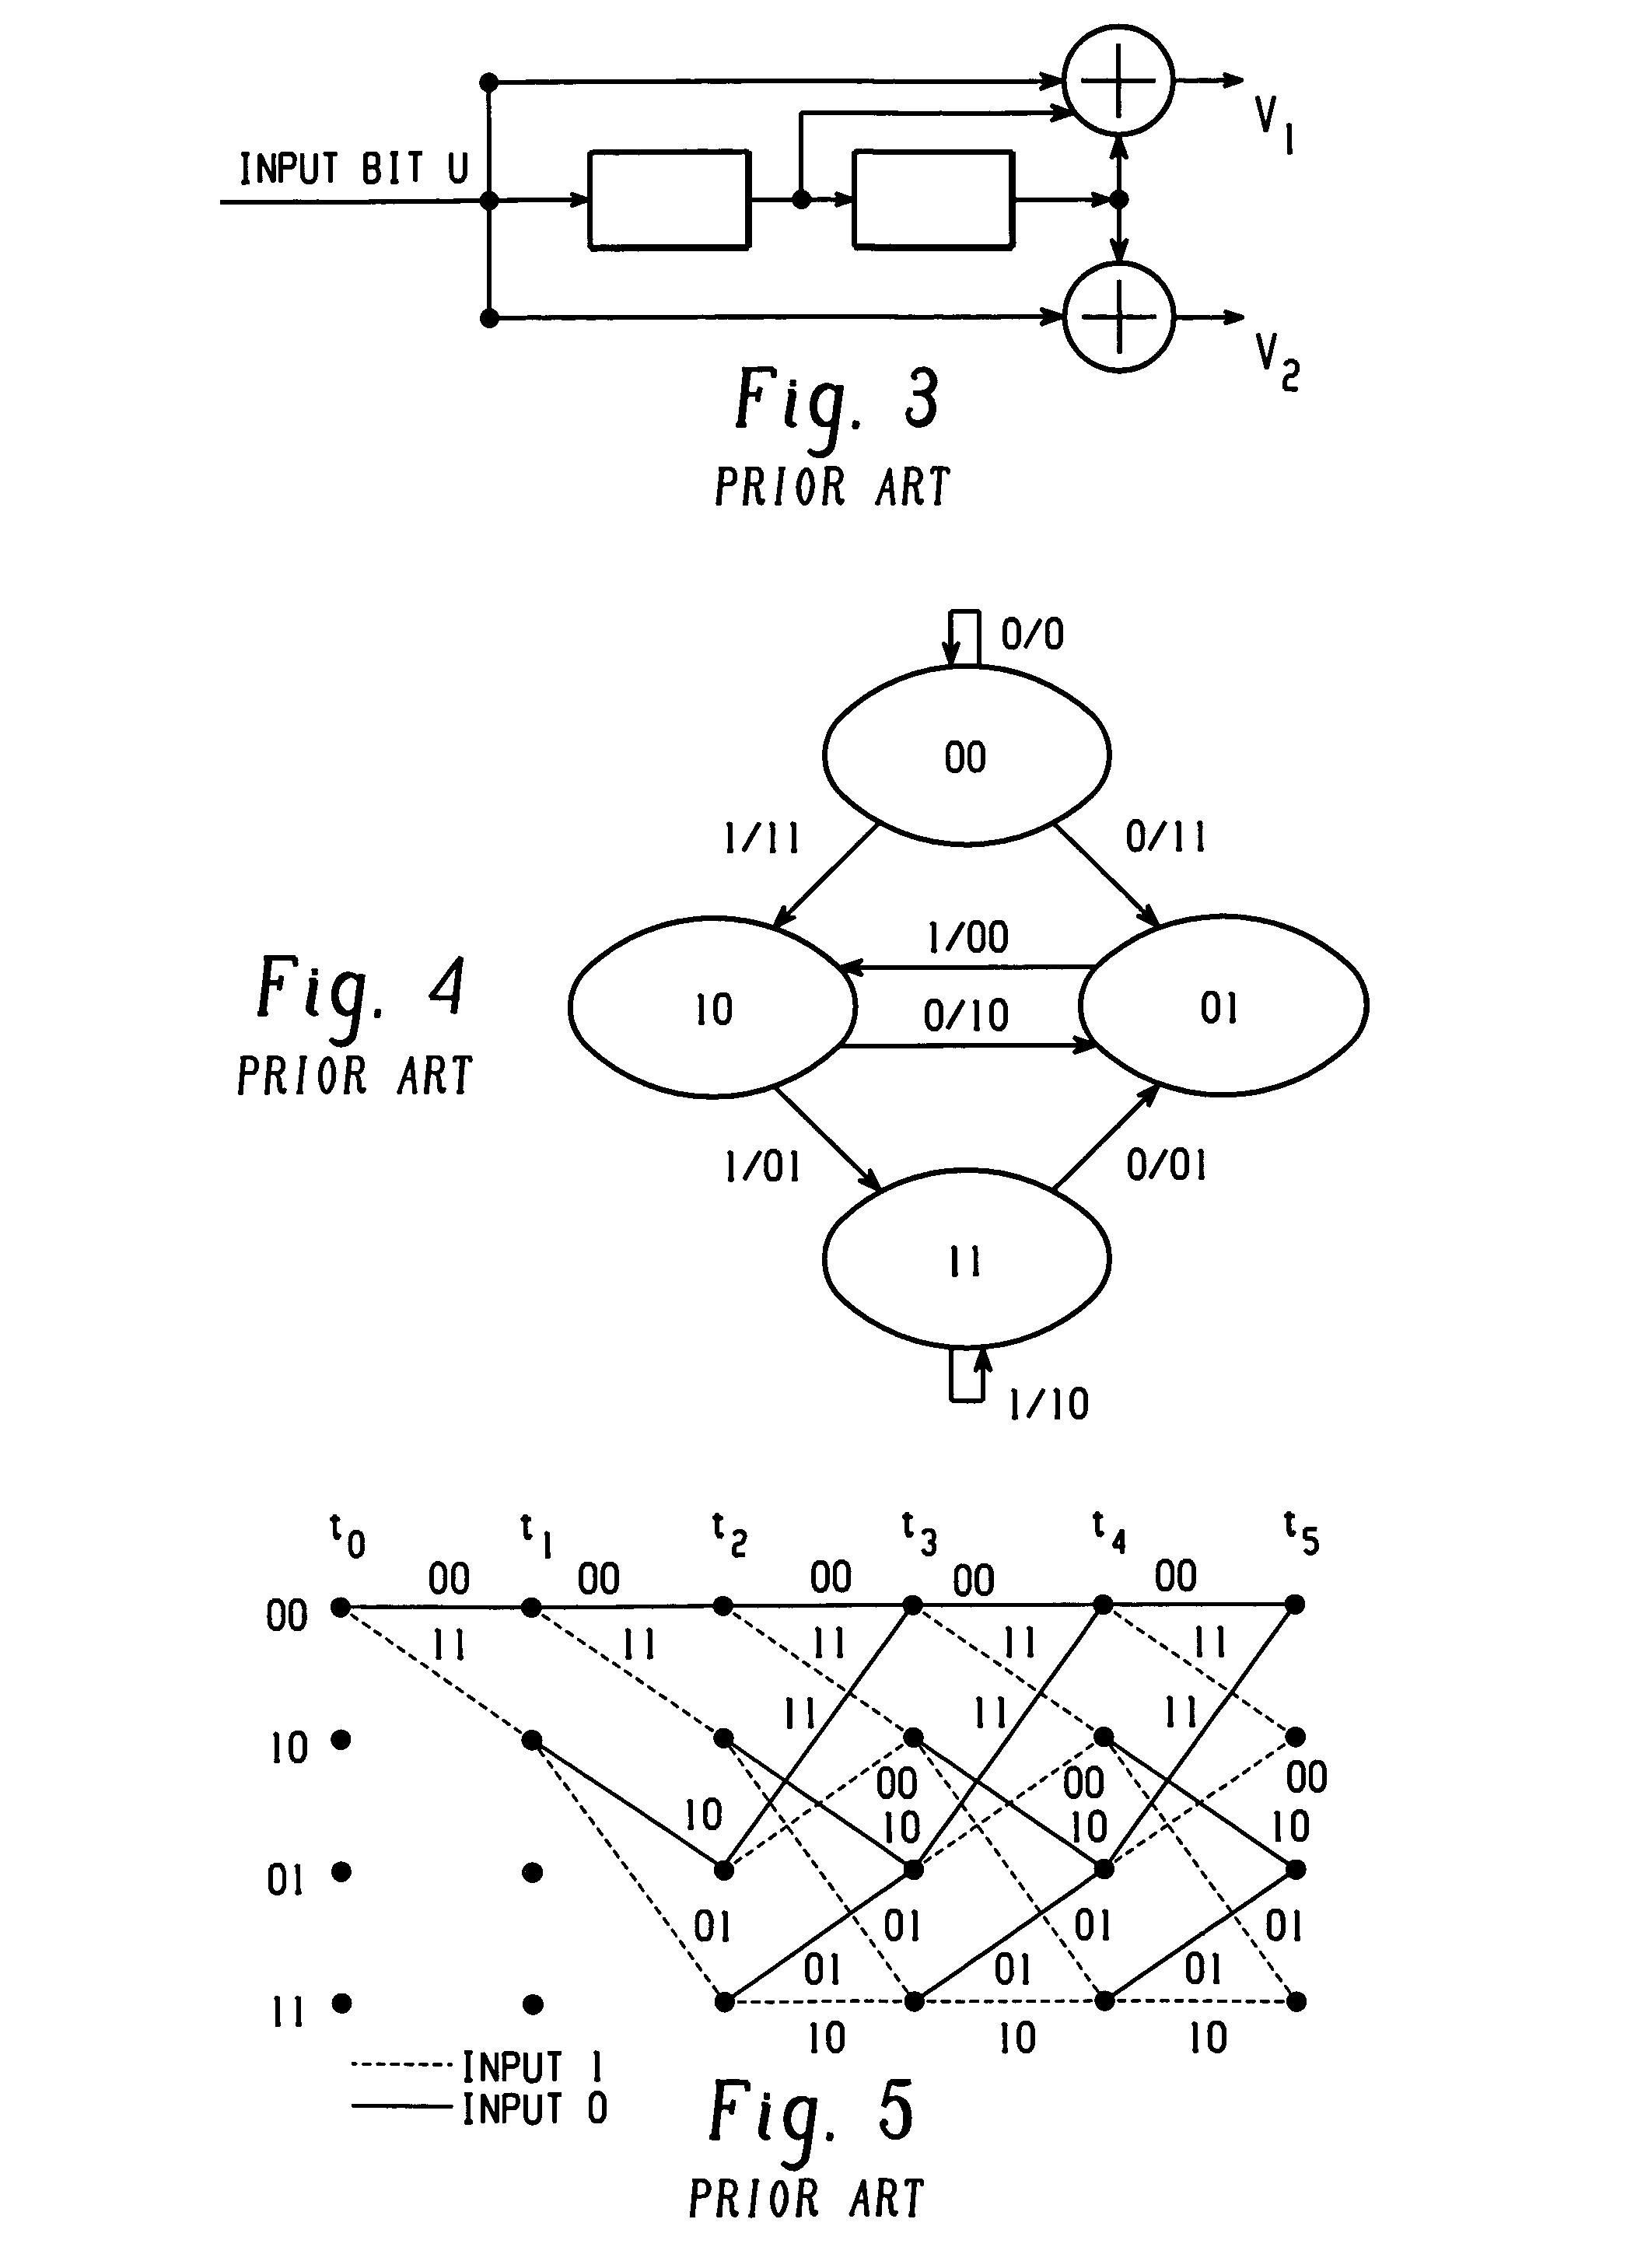 Apparatus and method of CTCM encoding and decoding for a digital communication system